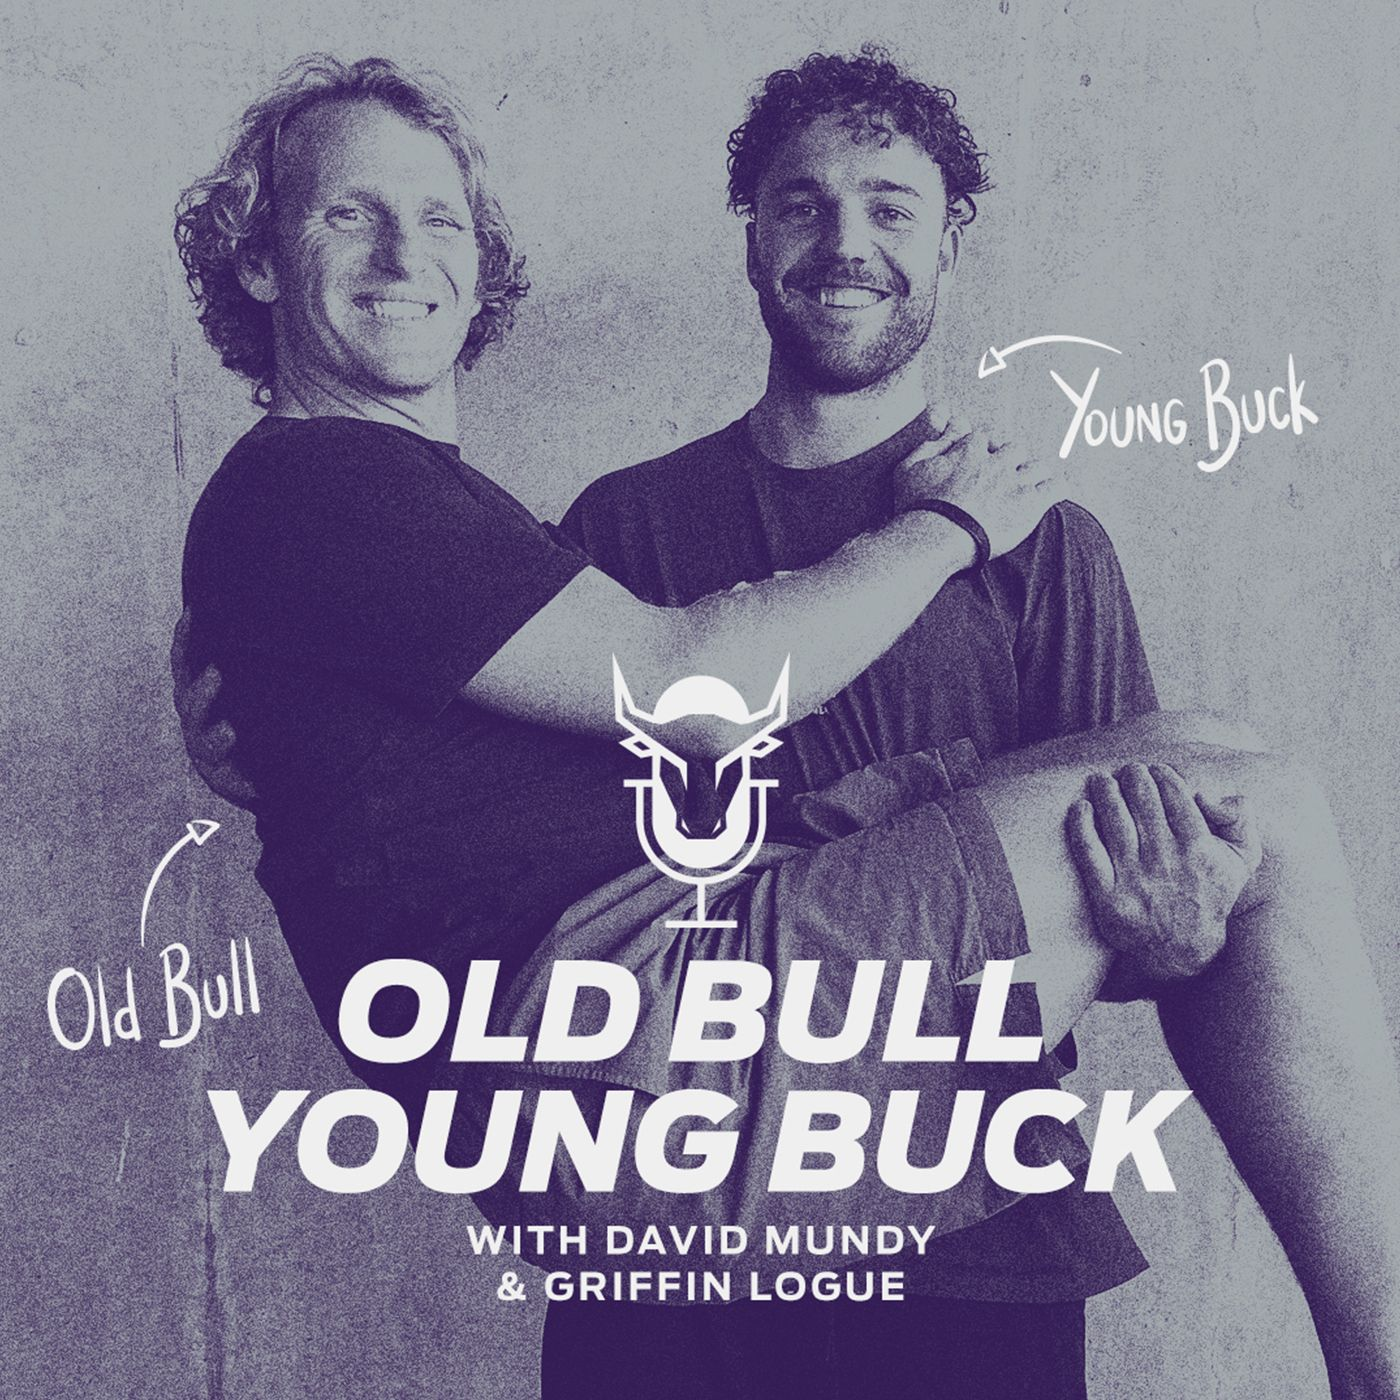 6. Old Bull, Young Buck...with Des Headland!